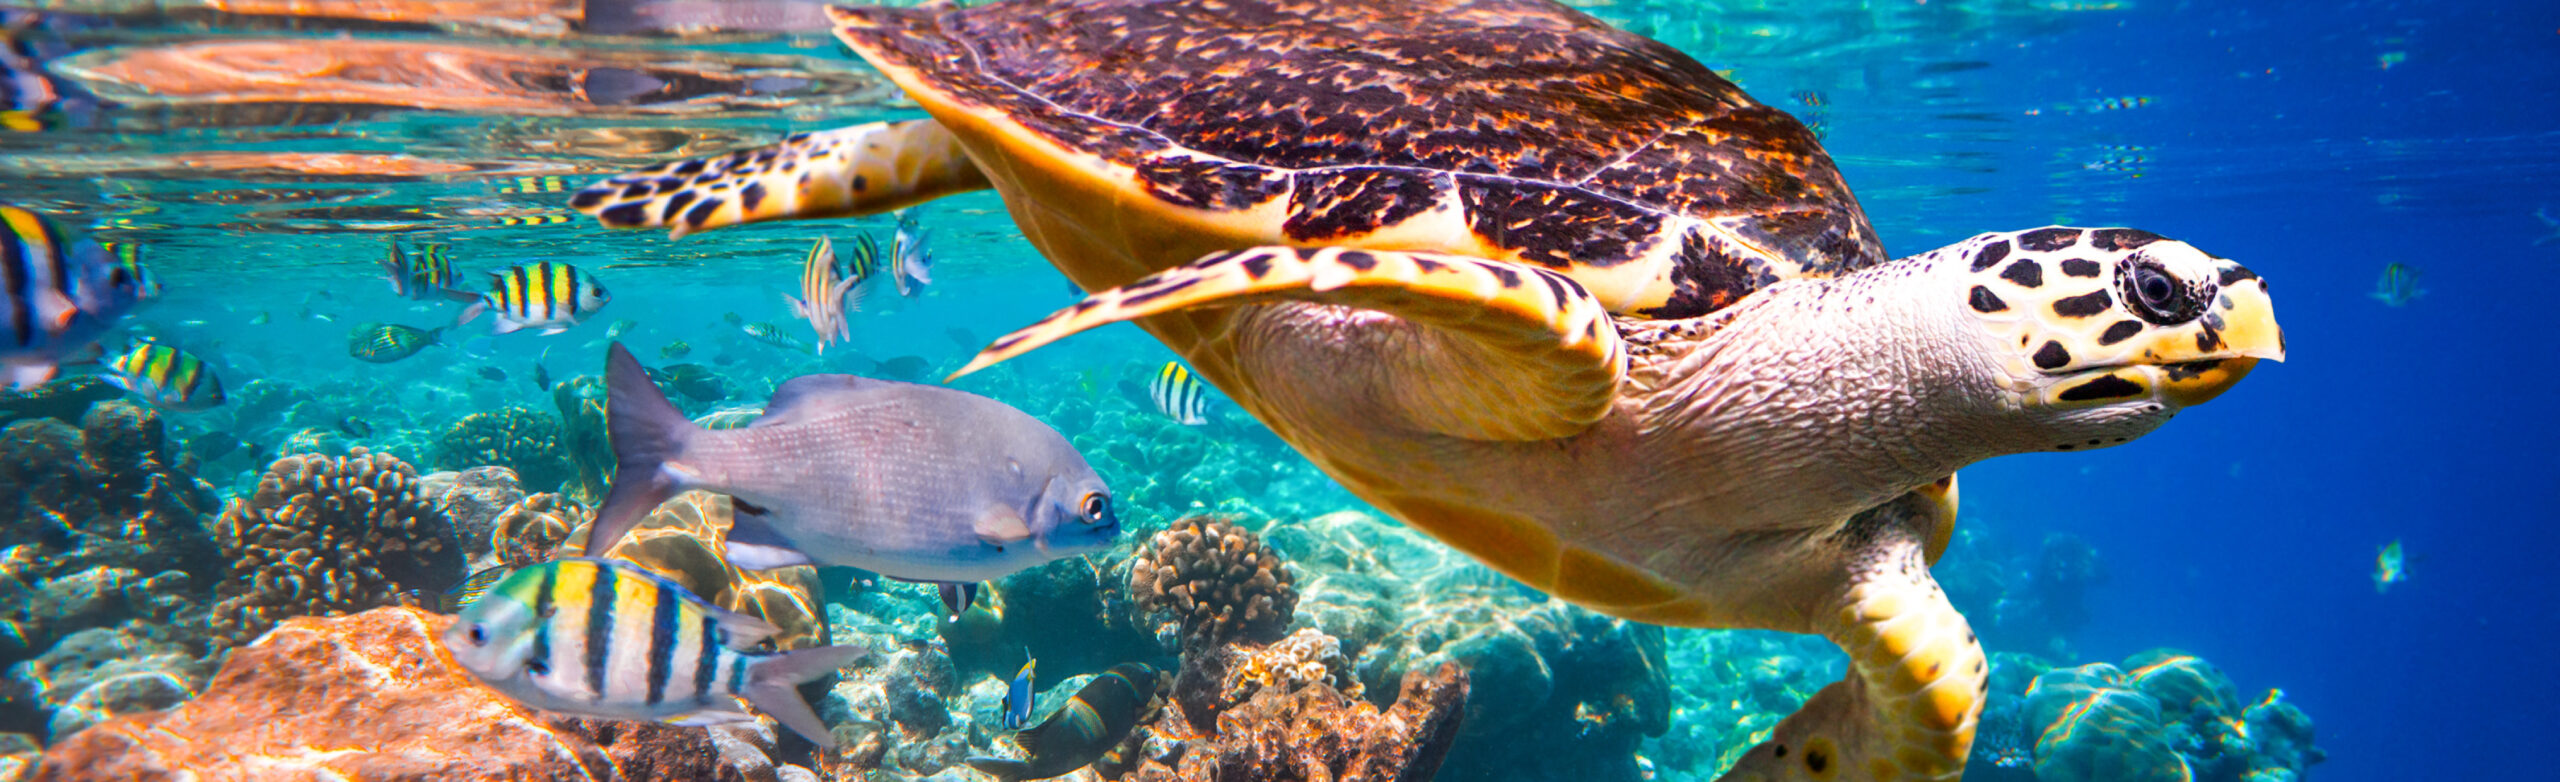 Flights To The Maldives, Underwater with turtle swimming